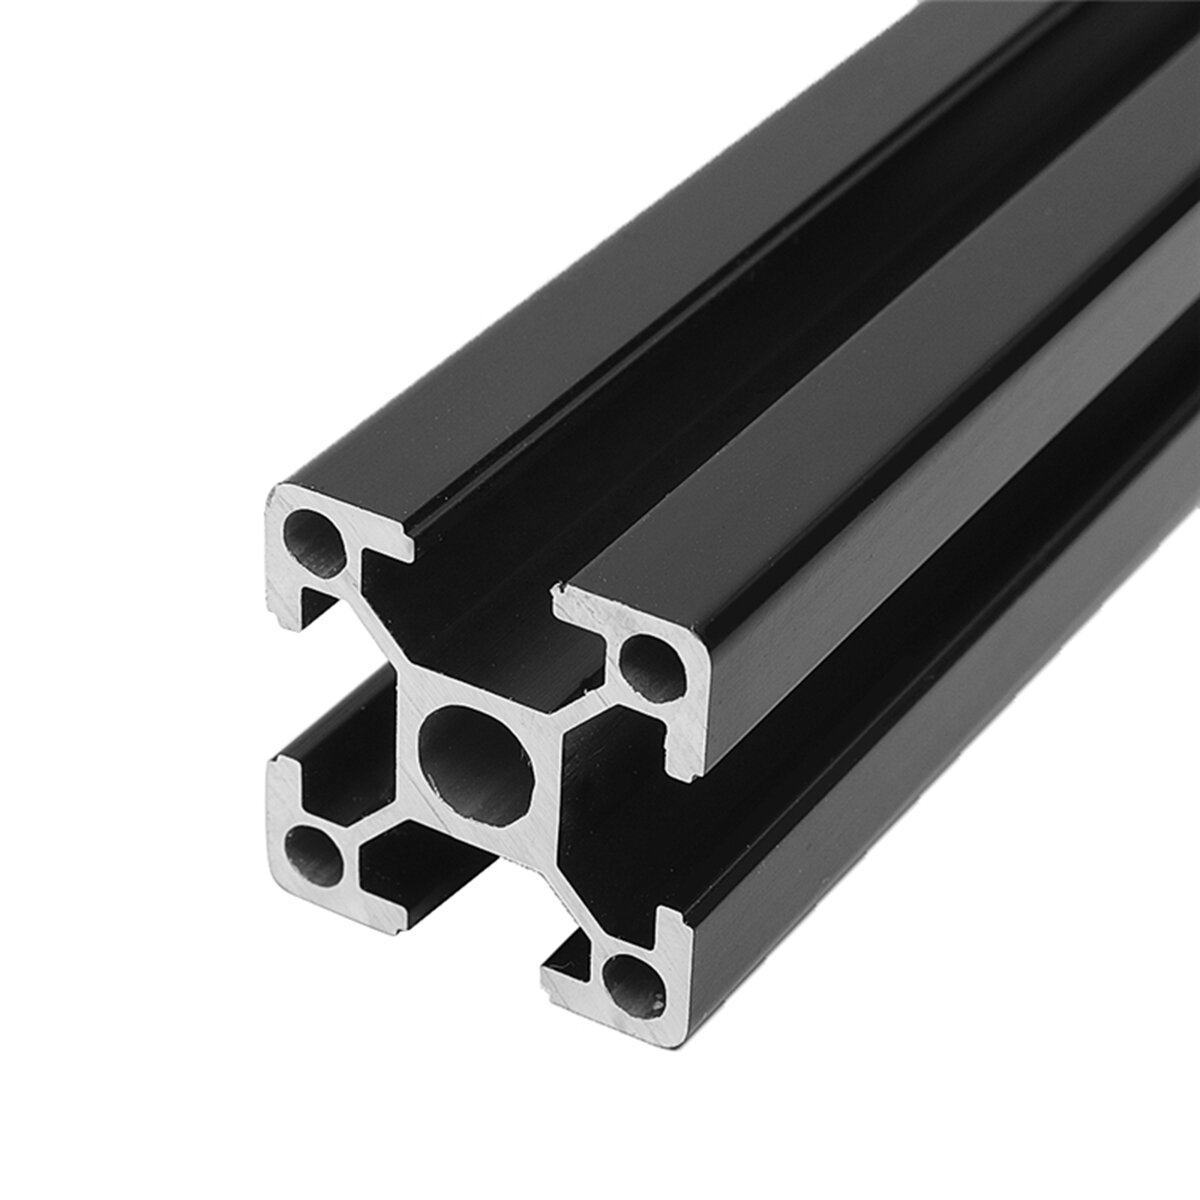 100-1200mm Length 2020 T-Slot Aluminum Profiles Extrusion Frame For CNC Stands COD